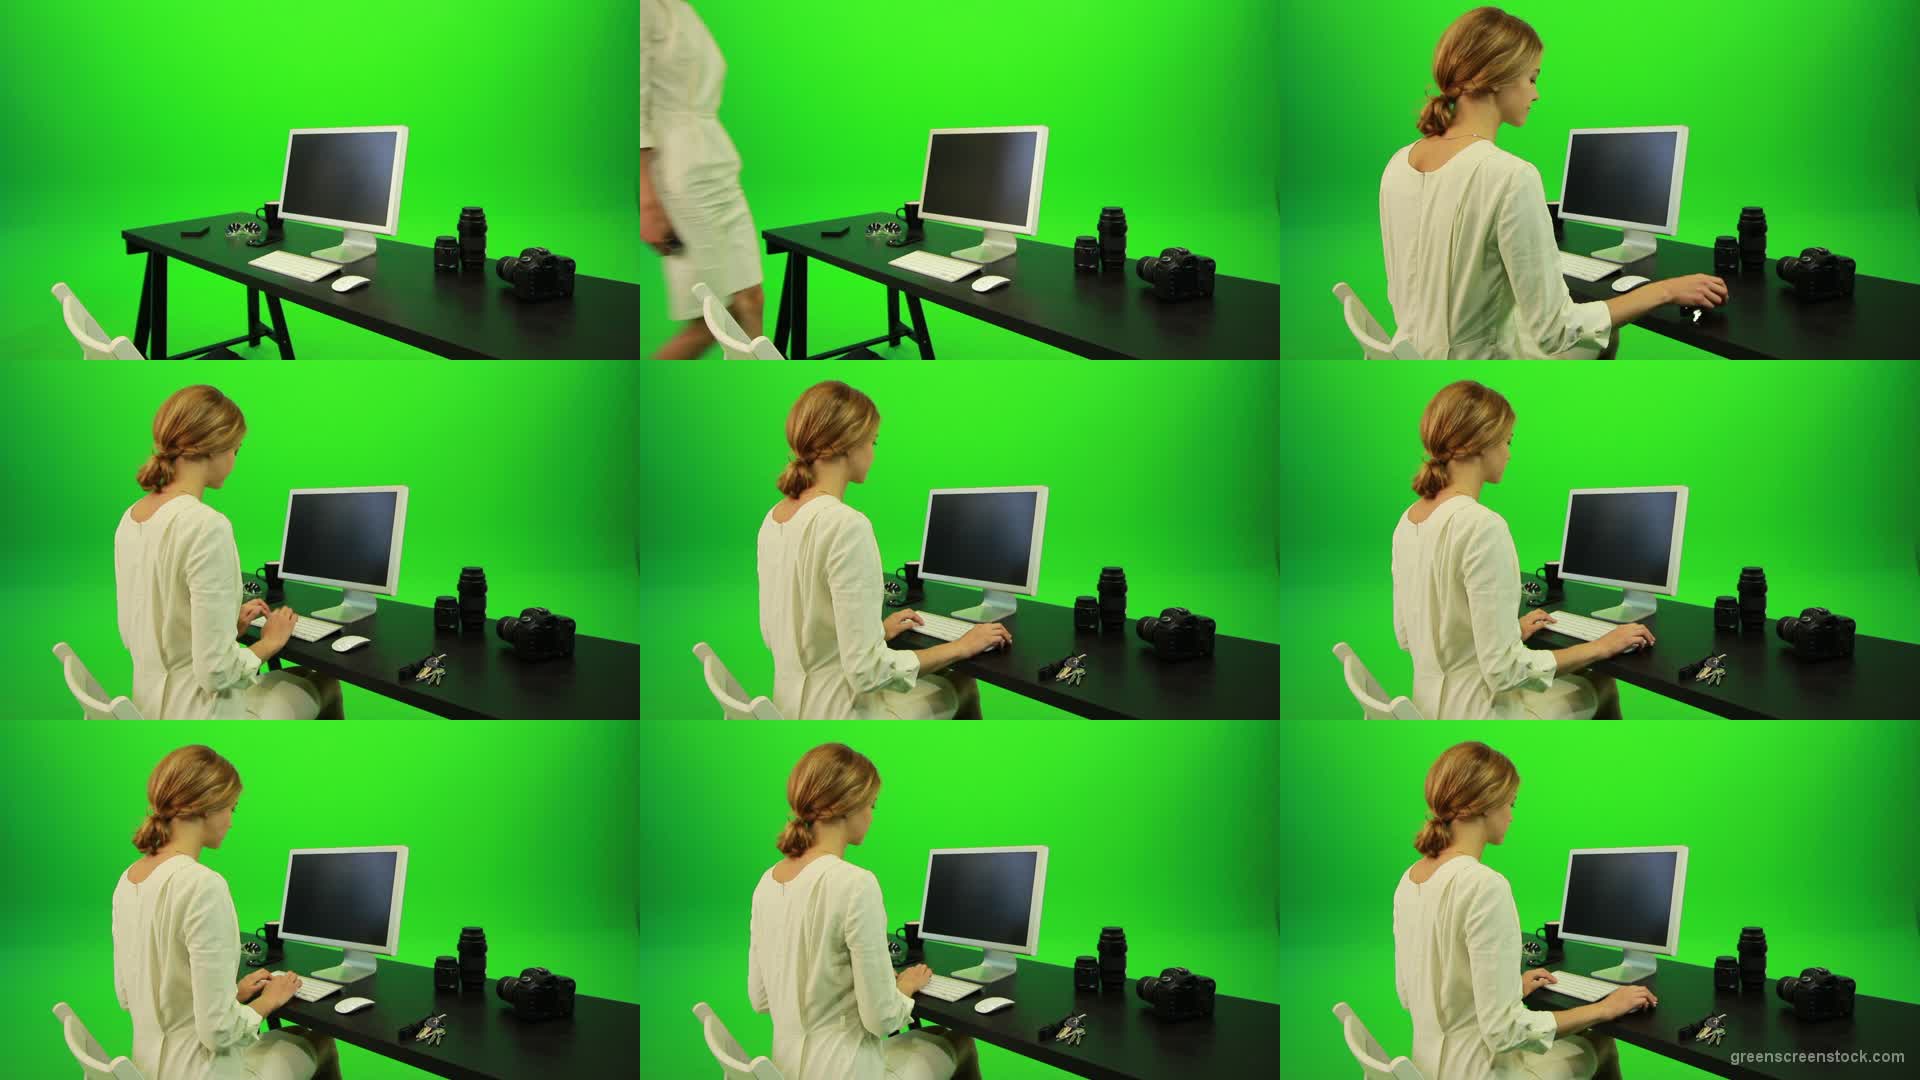 Woman-Sits-Down-and-Works-on-the-Computer-Green-Screen-Footage Green Screen Stock